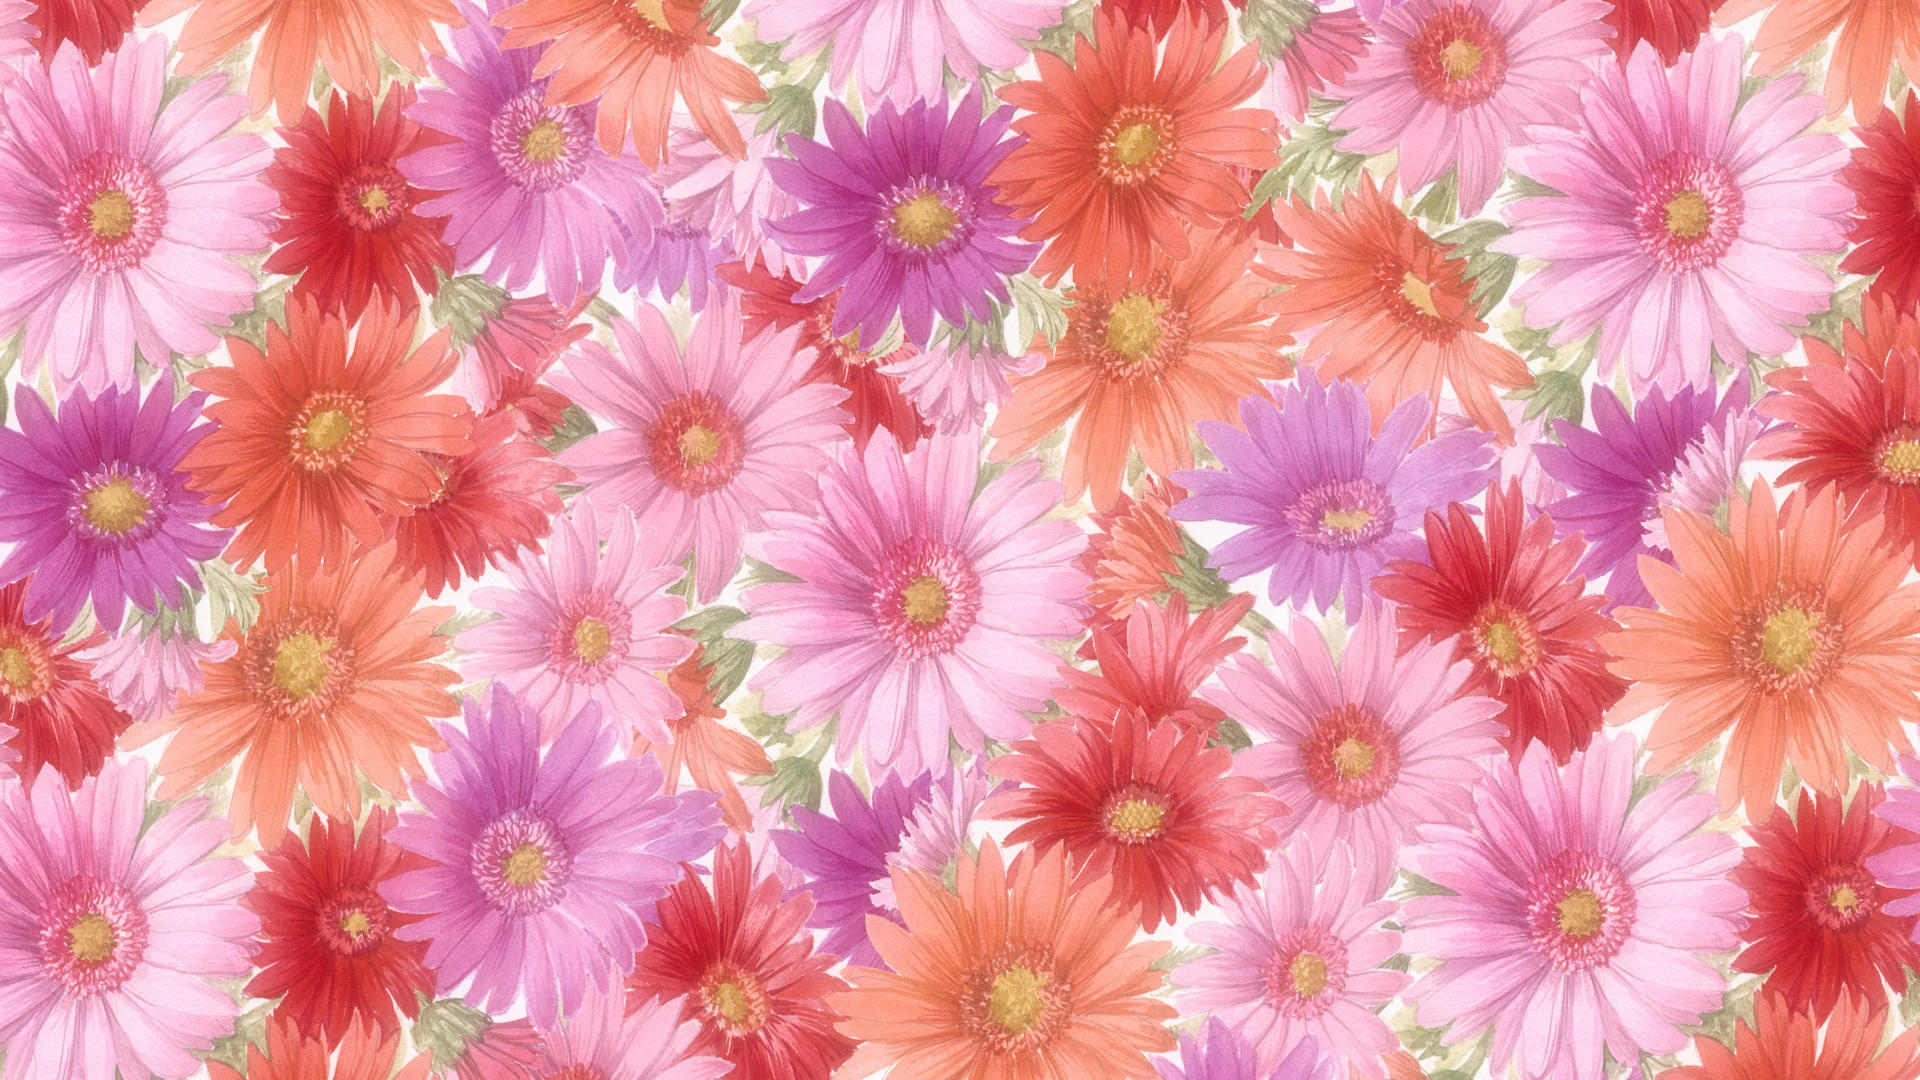 71 Flower Background Pictures